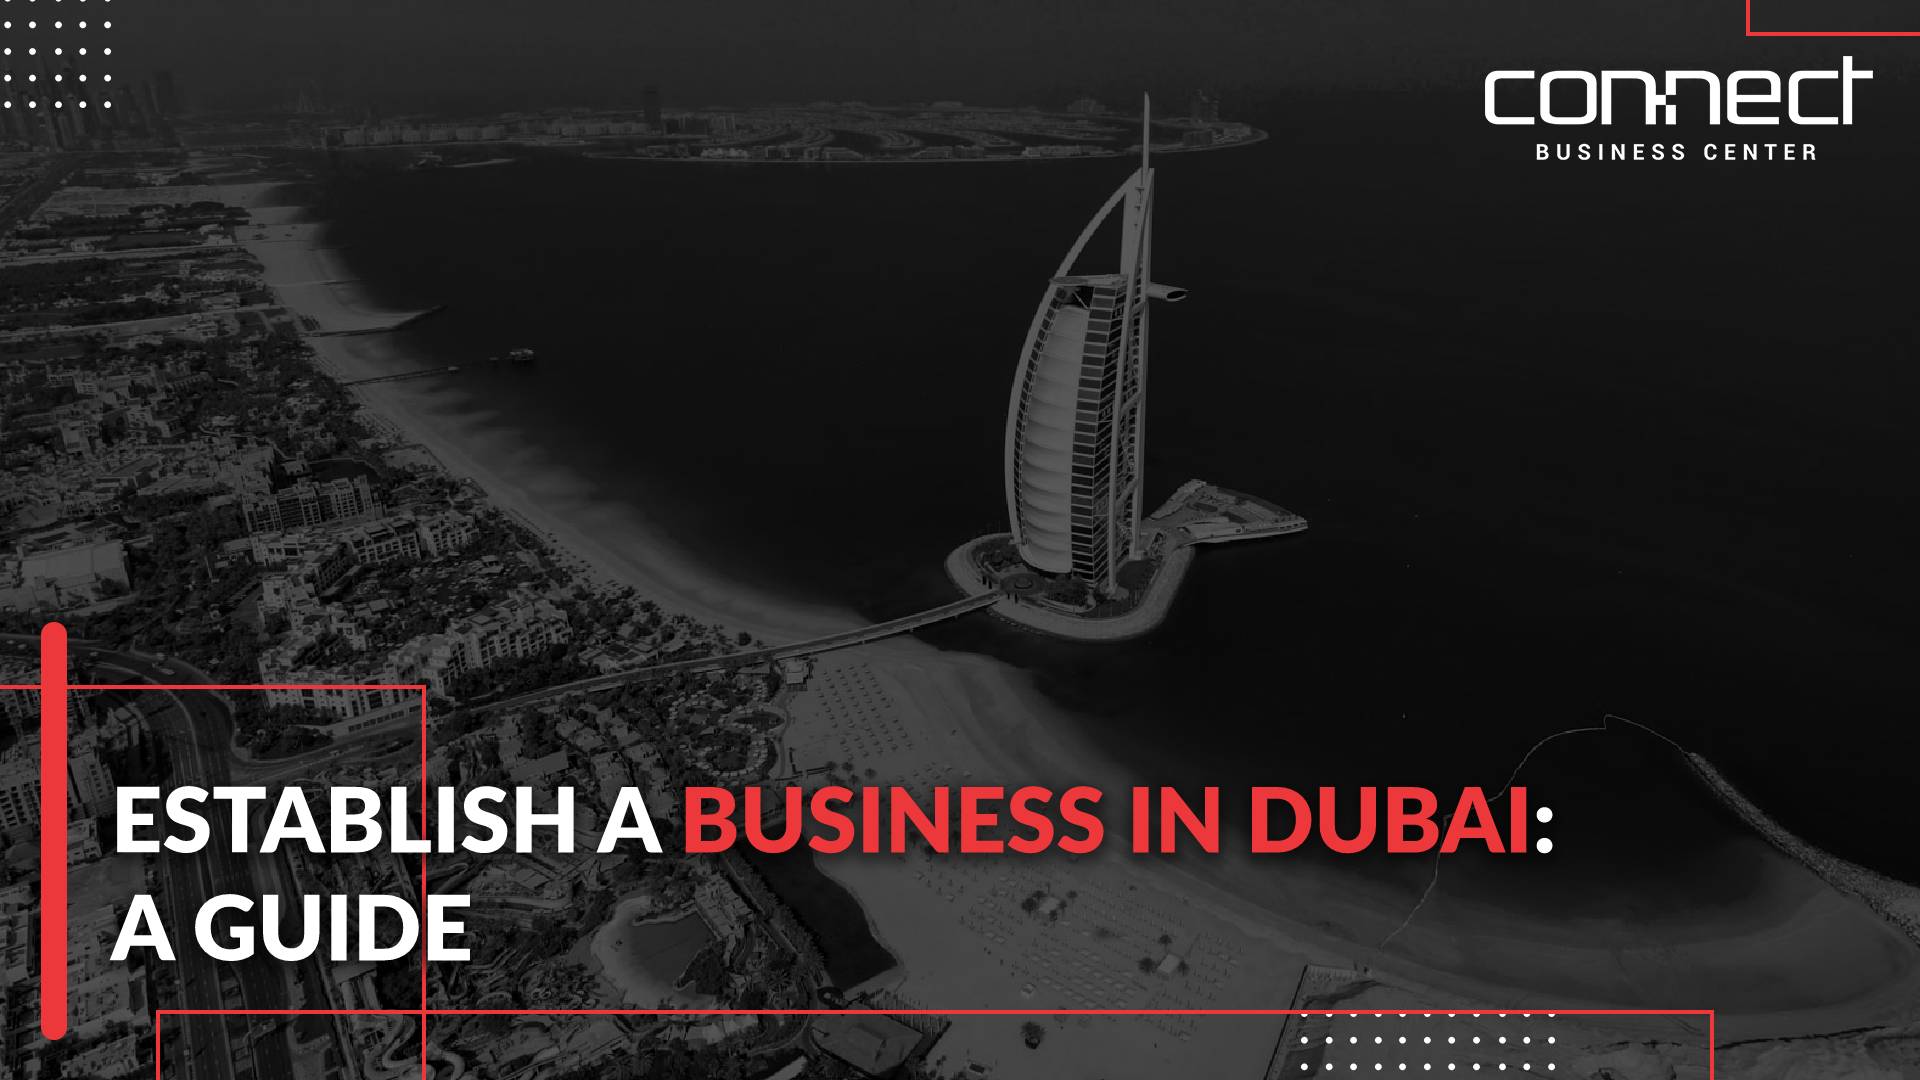 Dubai is a business paradise. This comes at no surprise as this Emirate has an impressive infrastructure, a set of policies in favor of investors, and more. Thus, it became necessary for many foreign investors to obtain proper guidance on how to establish a business in Dubai.